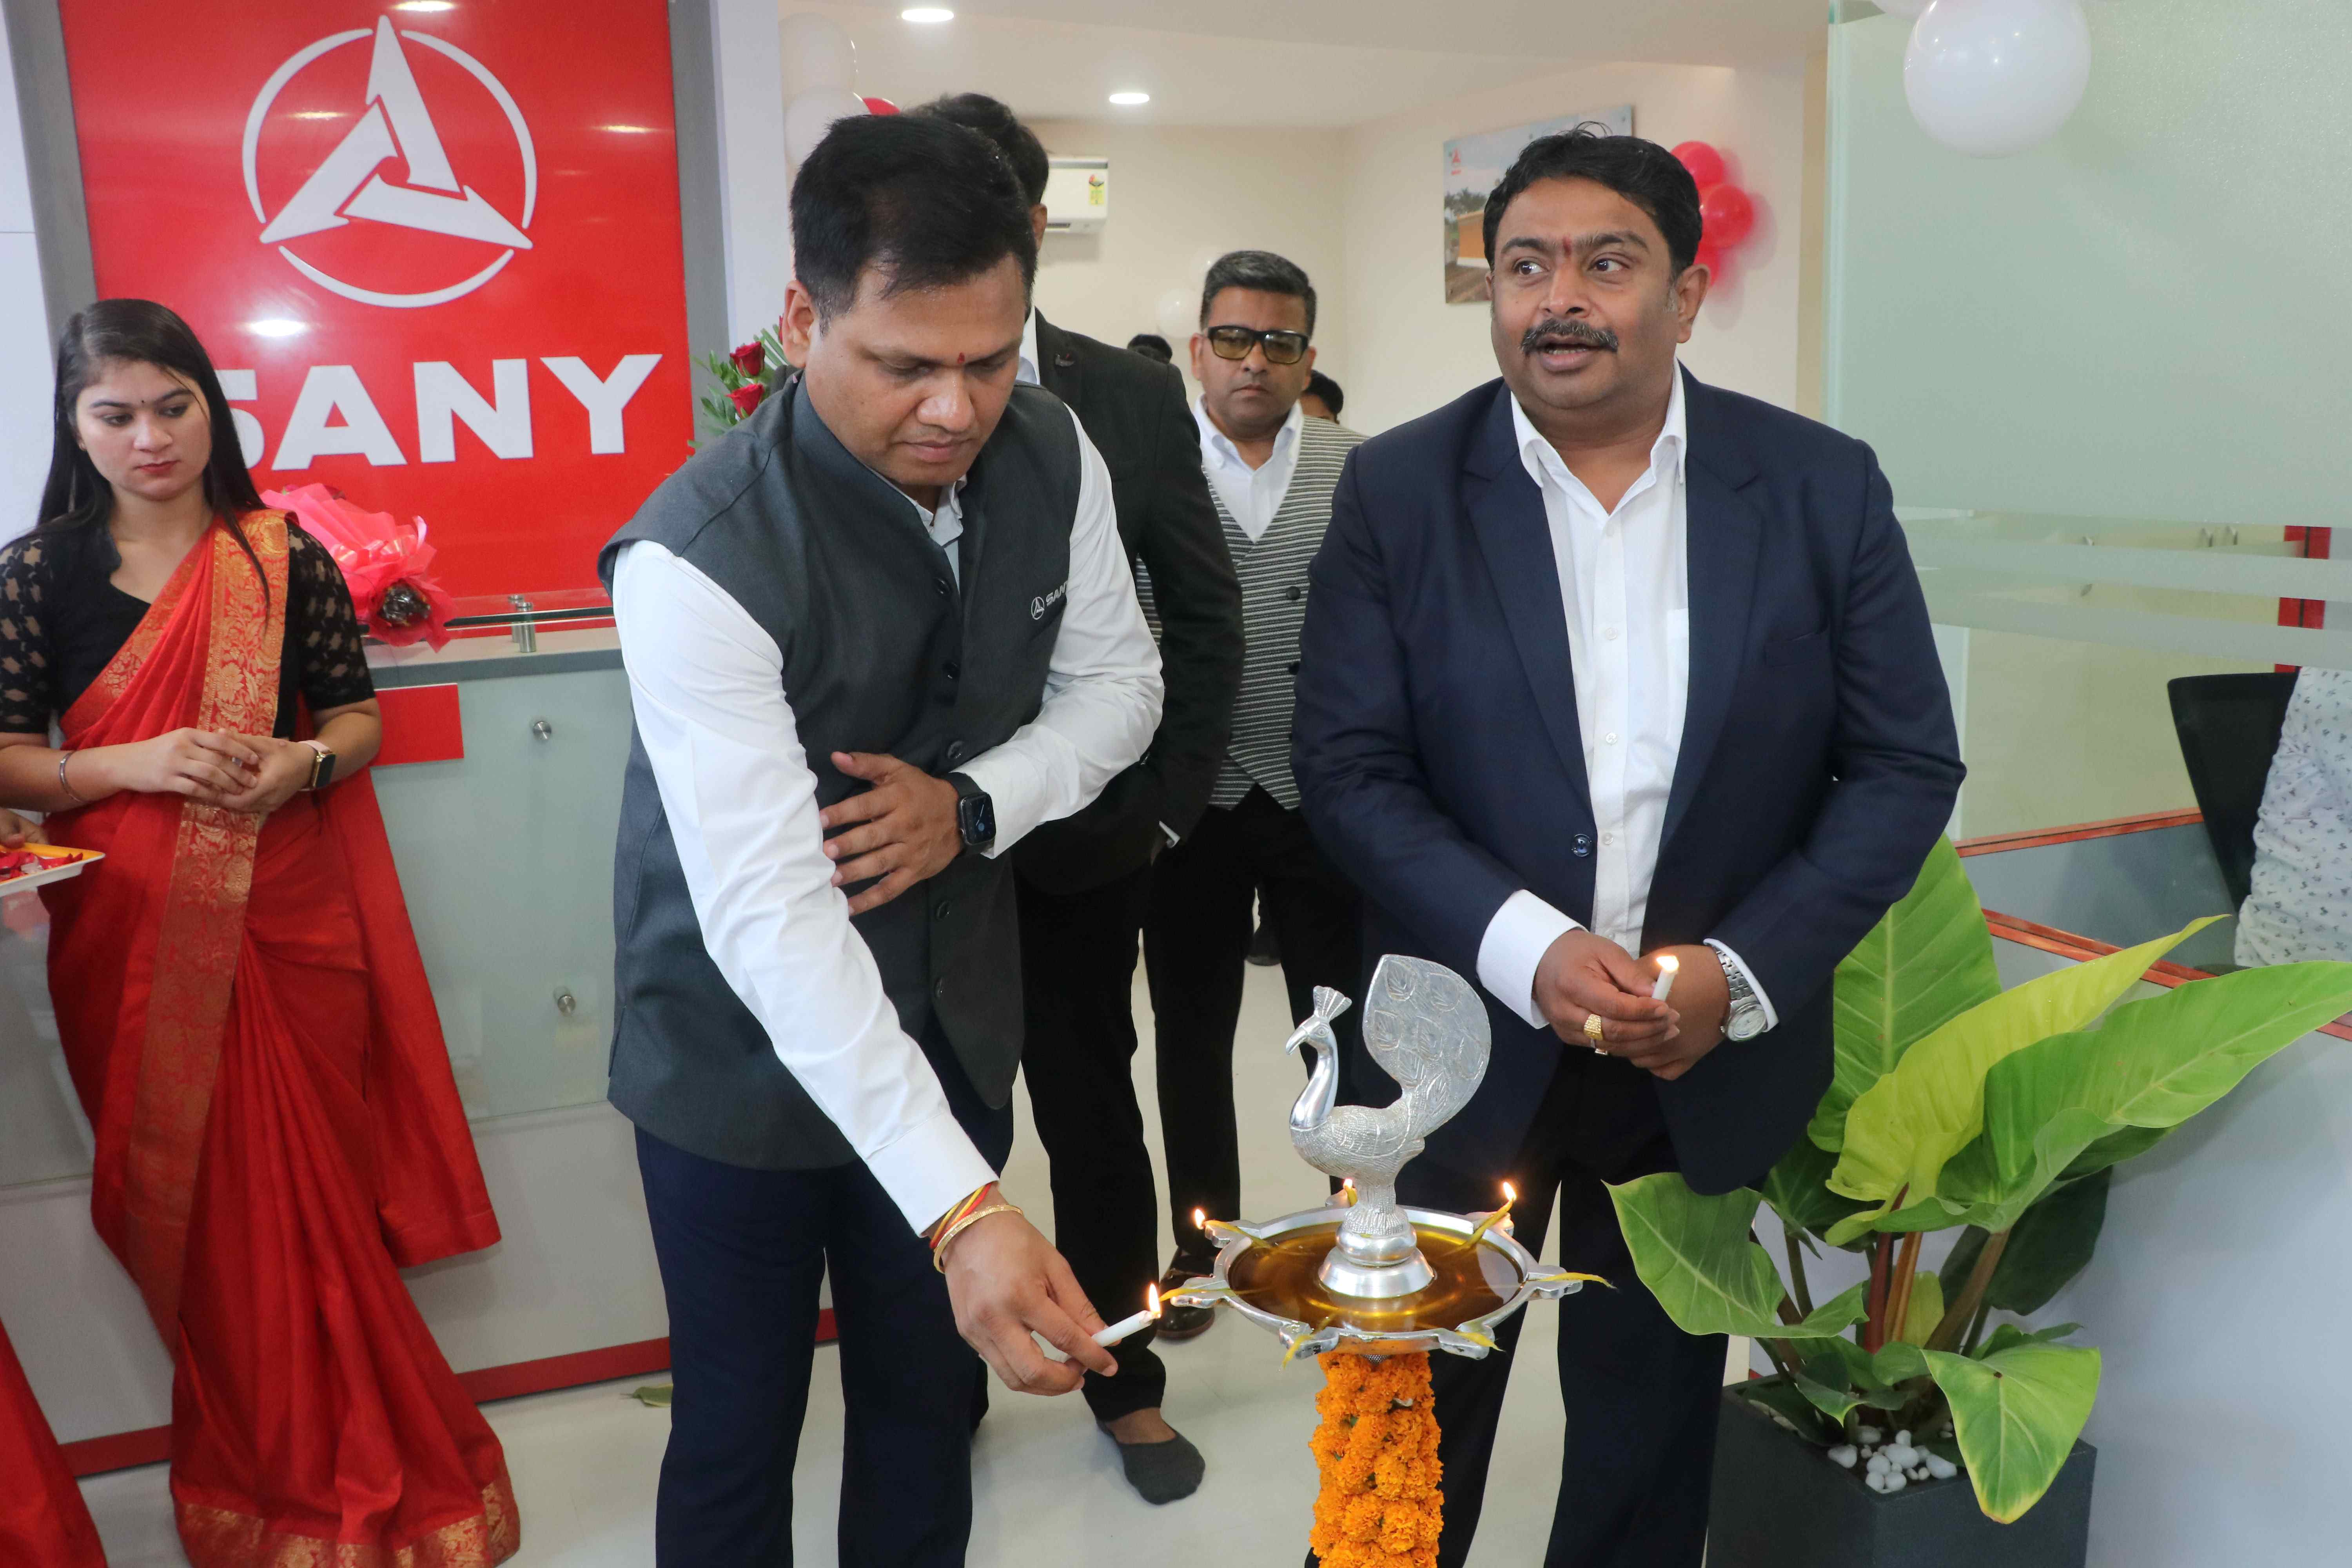 sany-india-expands-its-network-by-adding-a-new-dealership-in-chhattisgarh